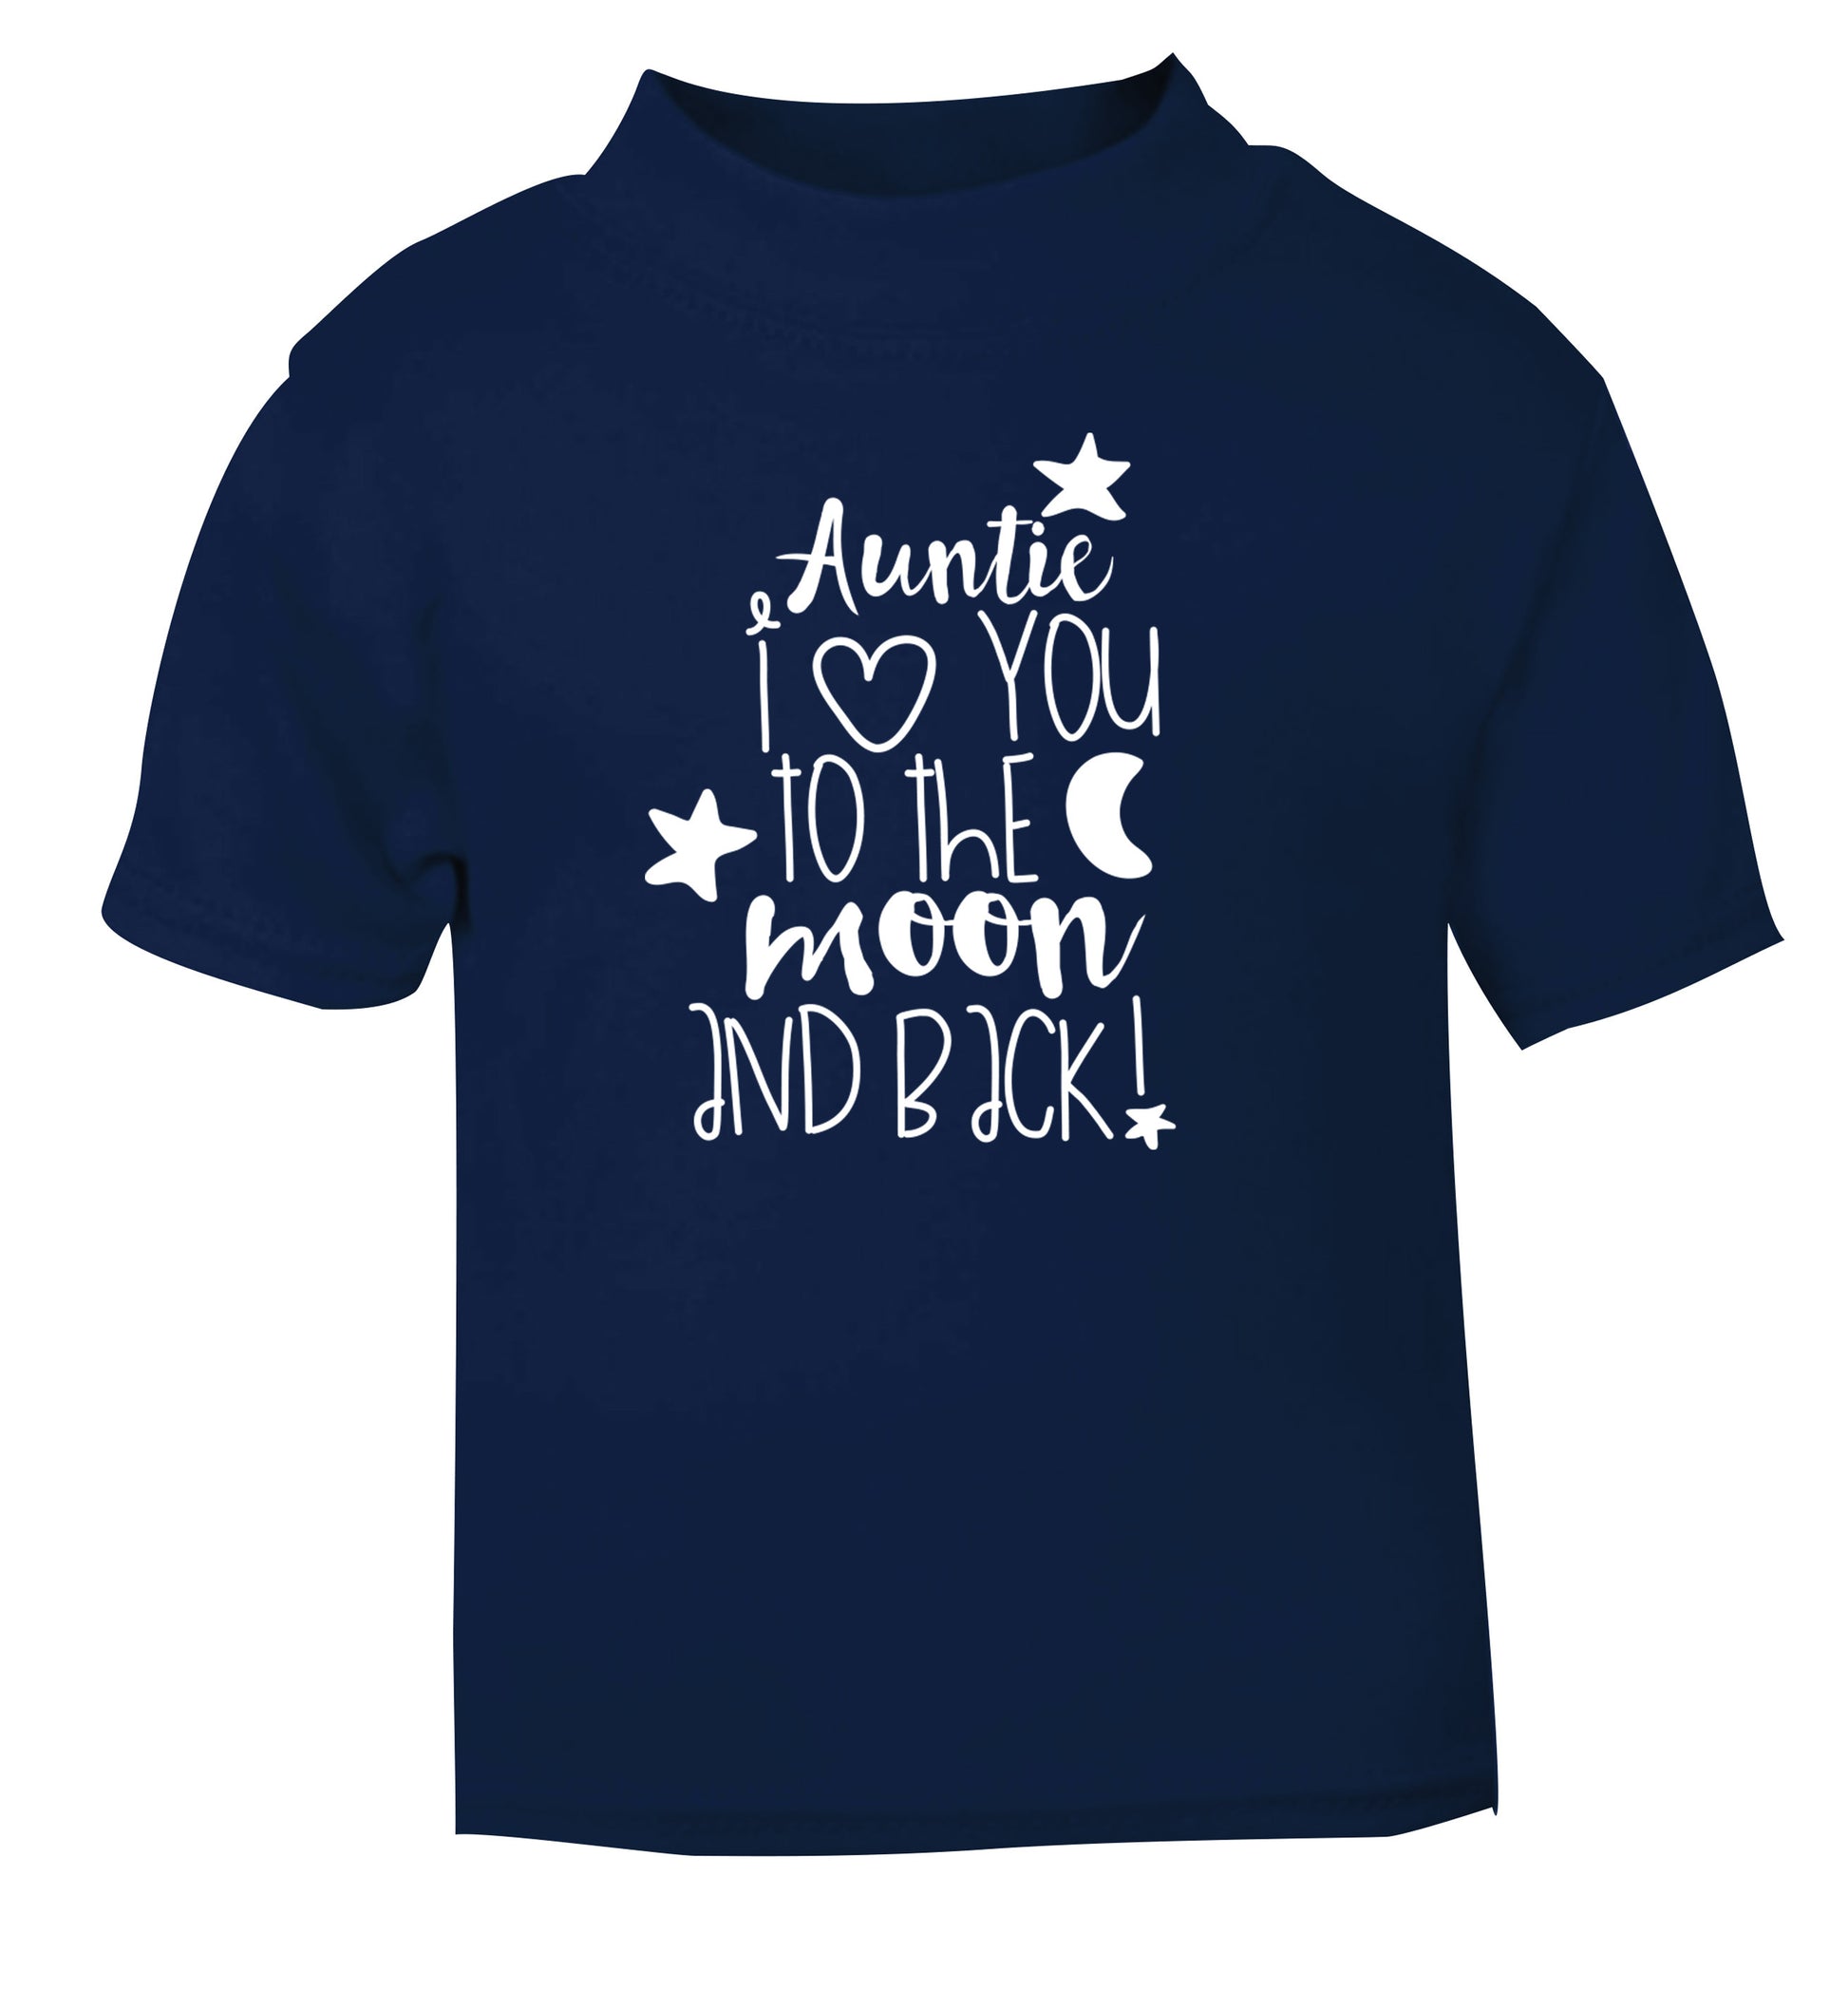 Auntie I love you to the moon and back navy Baby Toddler Tshirt 2 Years